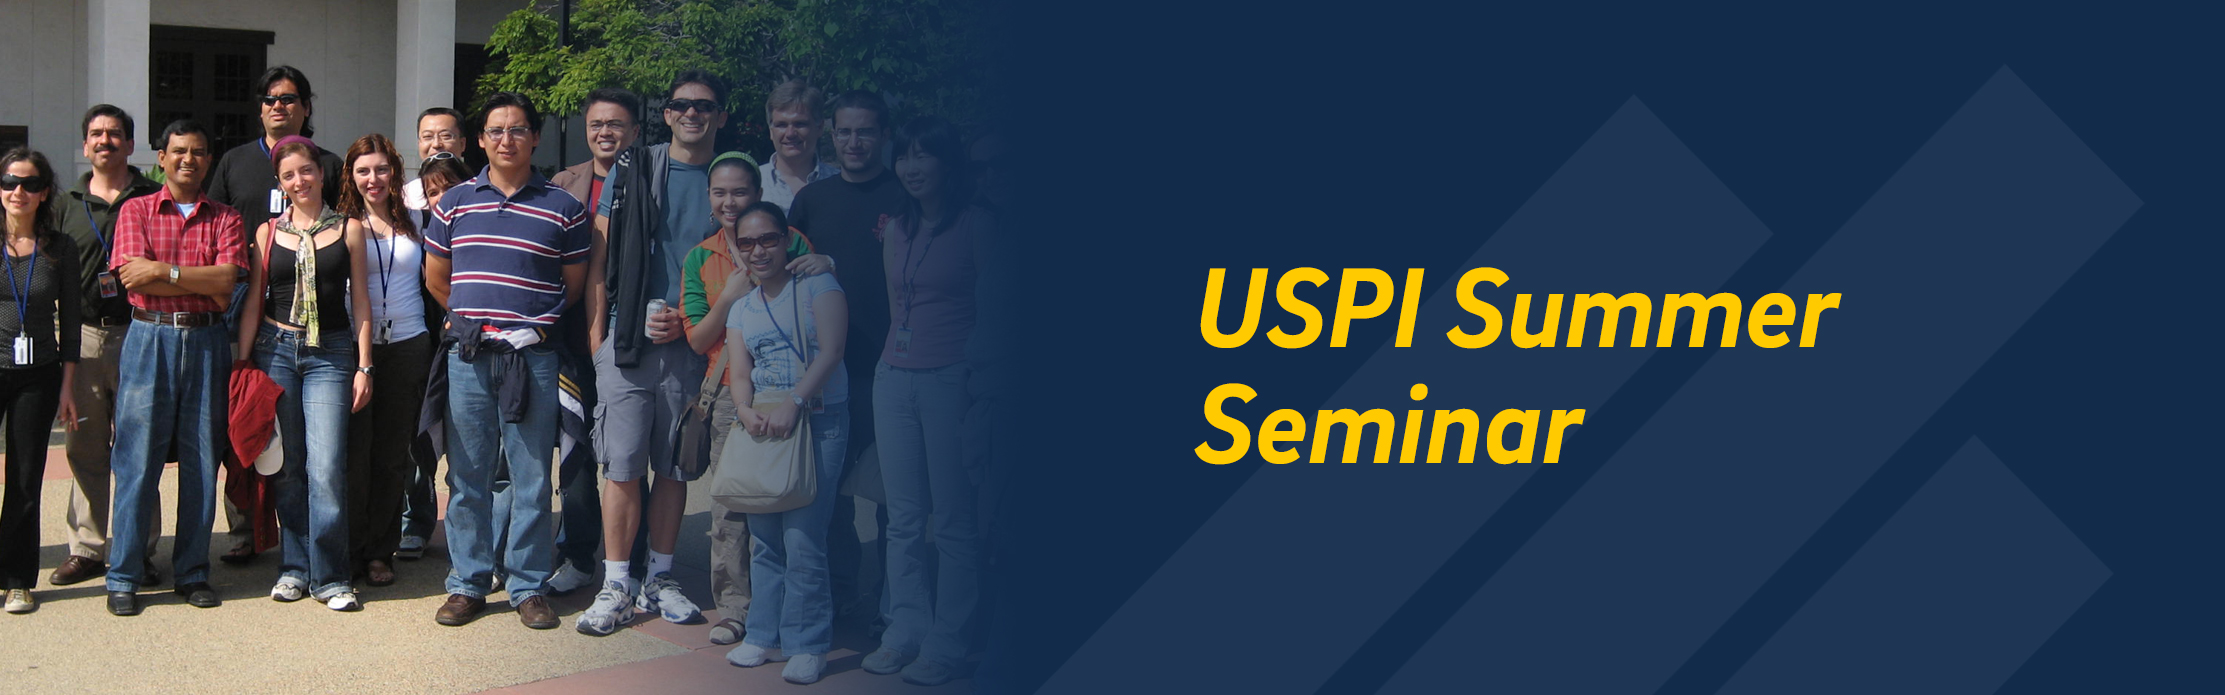 Group photo of summer seminar participants outside; the right side has a dark blue overlay with the UC San Diego branded element of a stylized trident